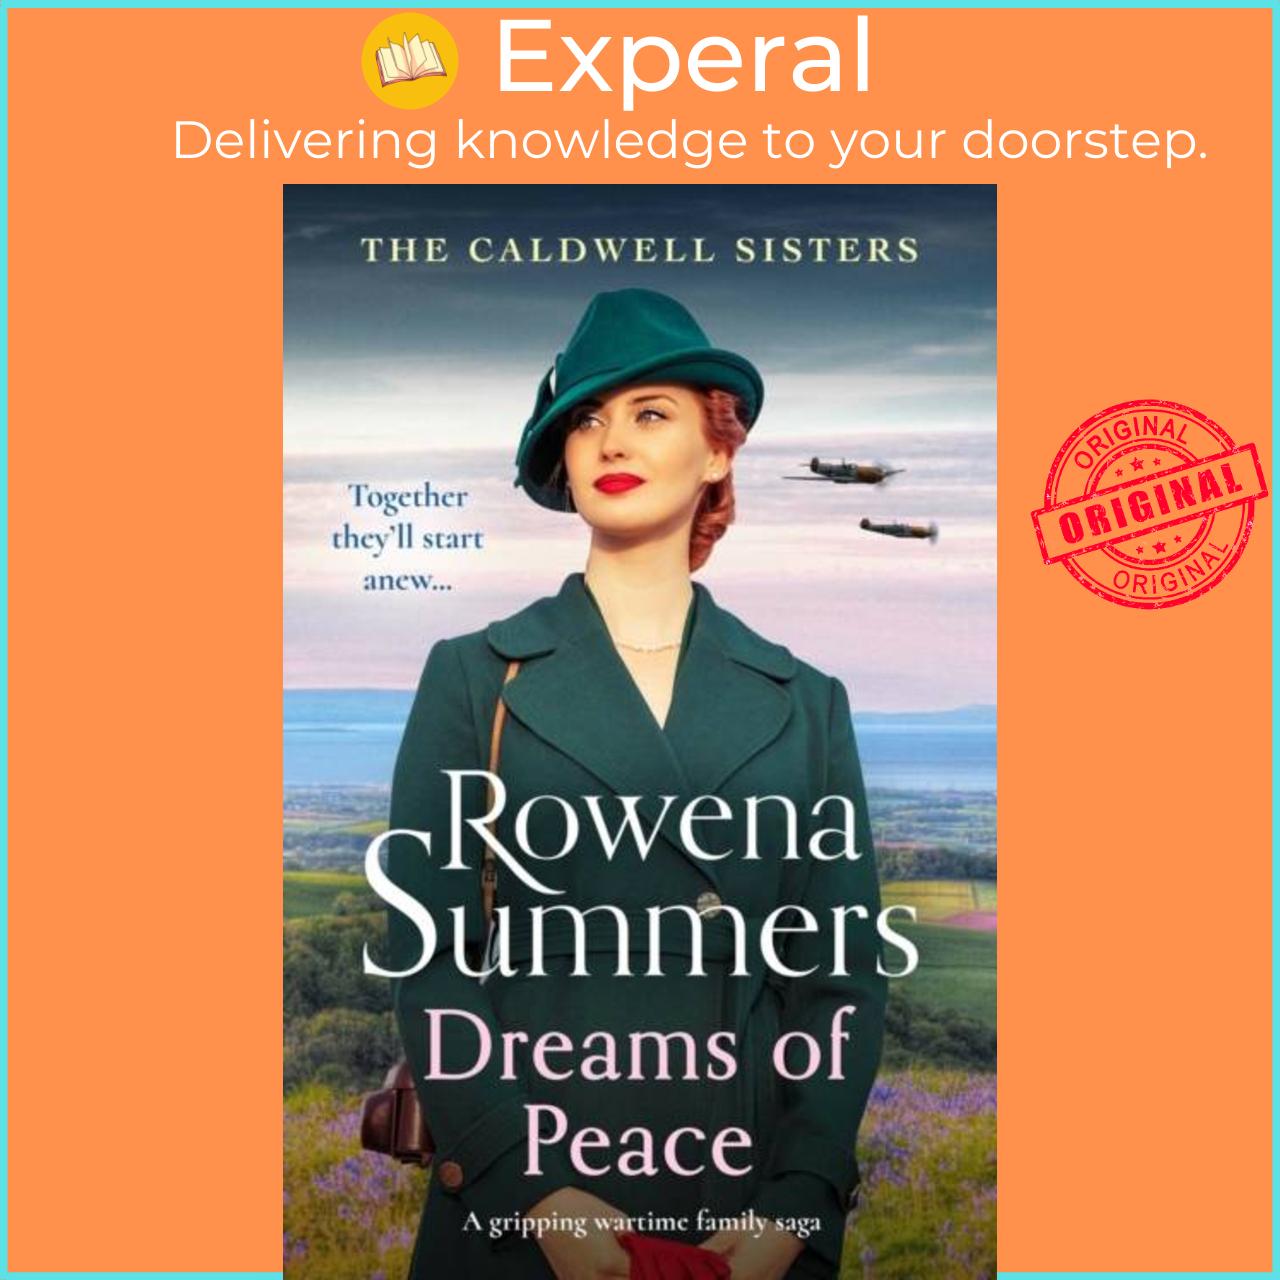 Sách - Dreams of Peace - A gripping wartime family saga by Rowena Summers (UK edition, paperback)